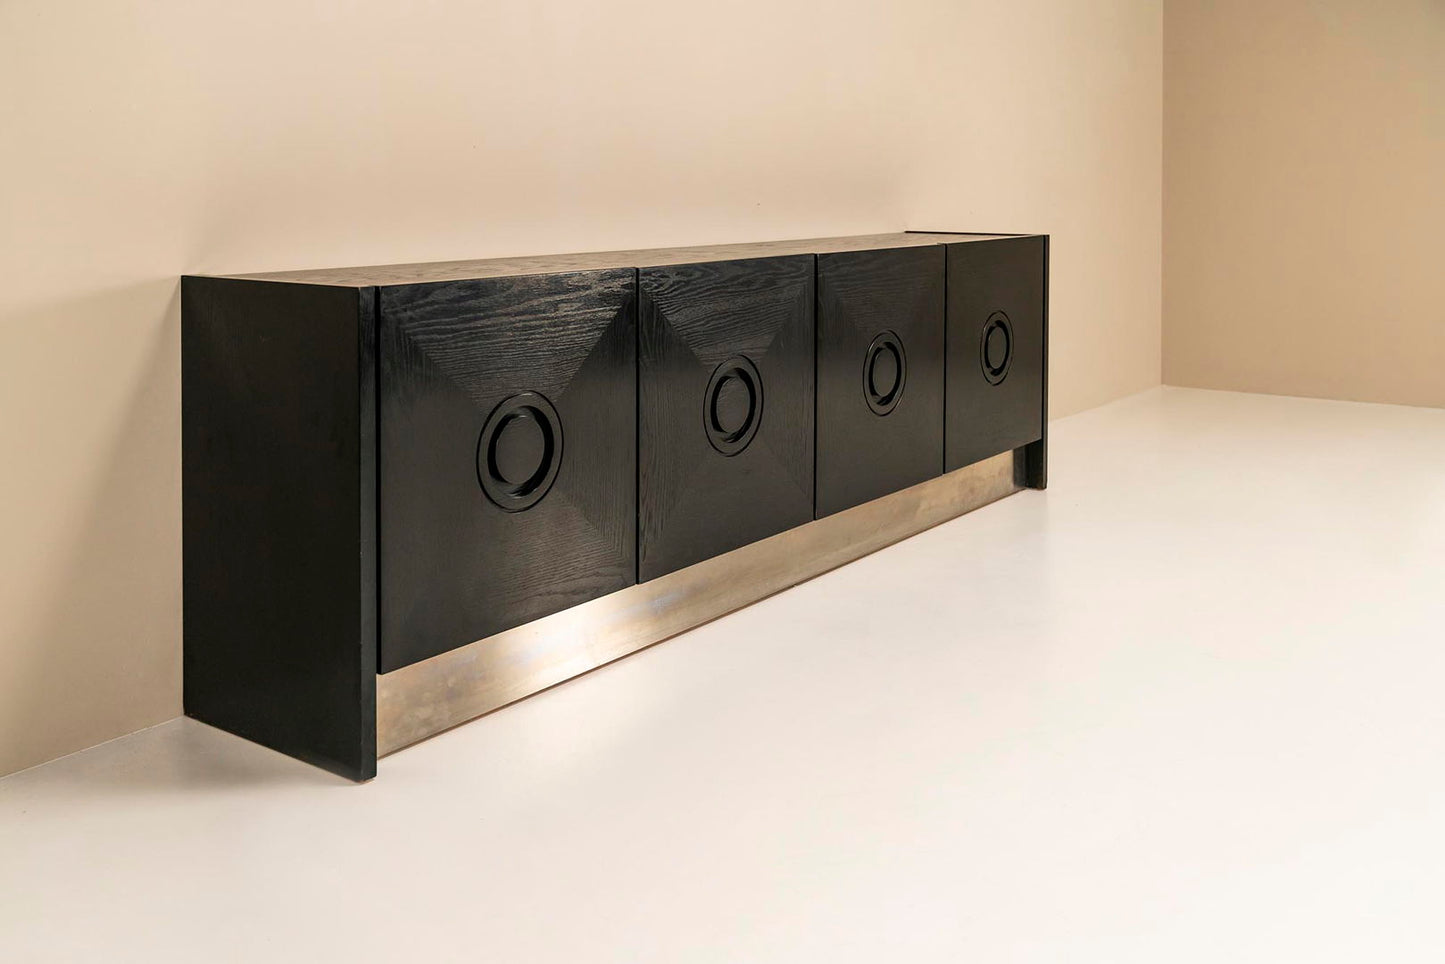 Brutalist Sideboard In Black Stained Oak And Brushed Steel, Belgium 1970s.